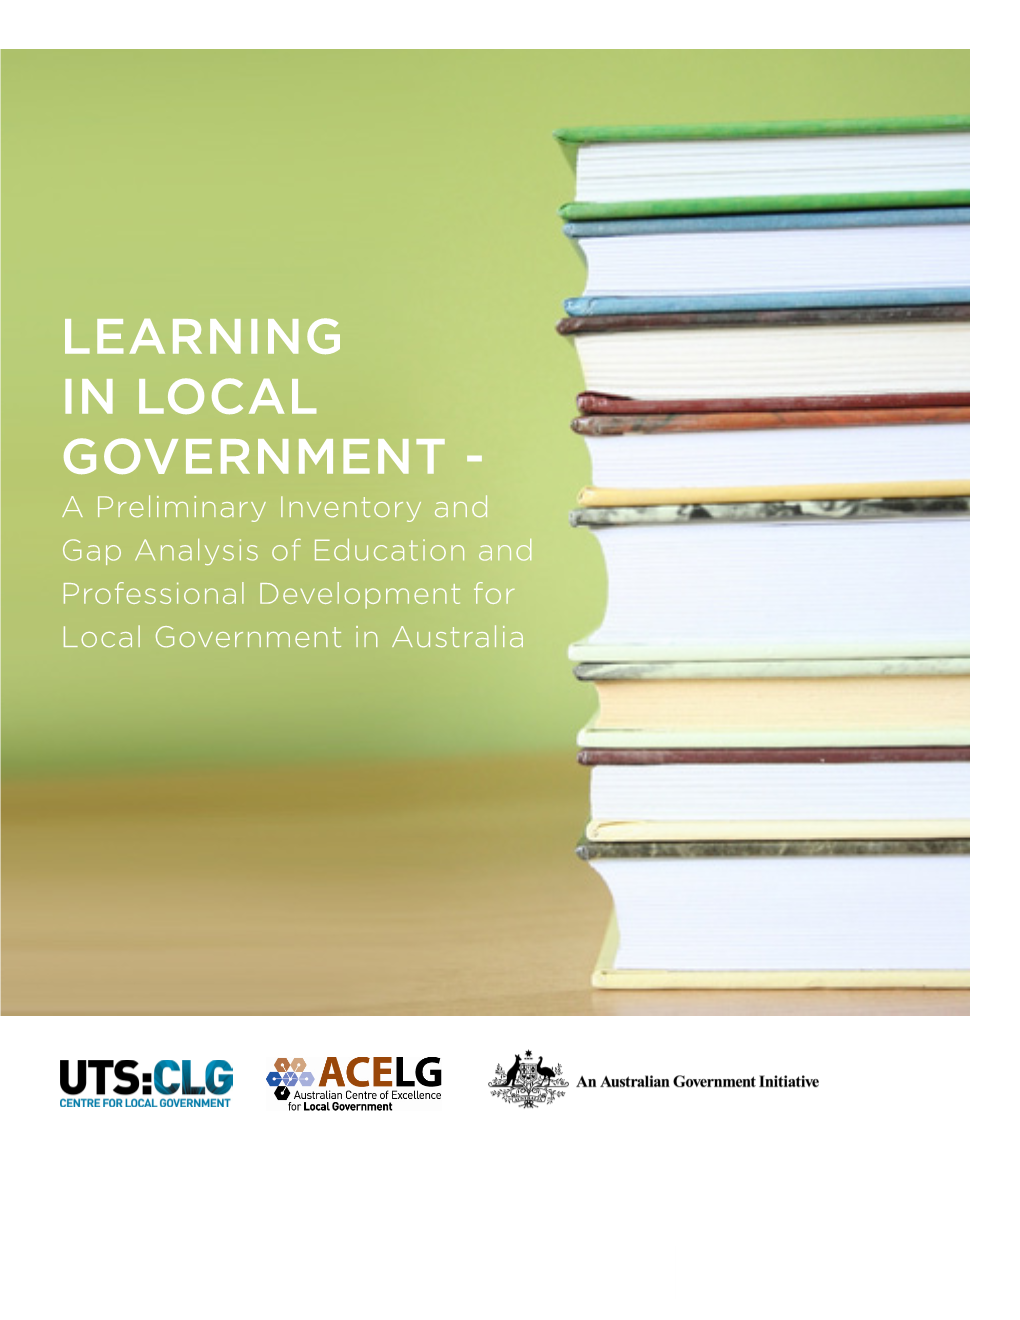 LEARNING in LOCAL GOVERNMENT - a Preliminary Inventory and Gap Analysis of Education and Professional Development for Local Government in Australia